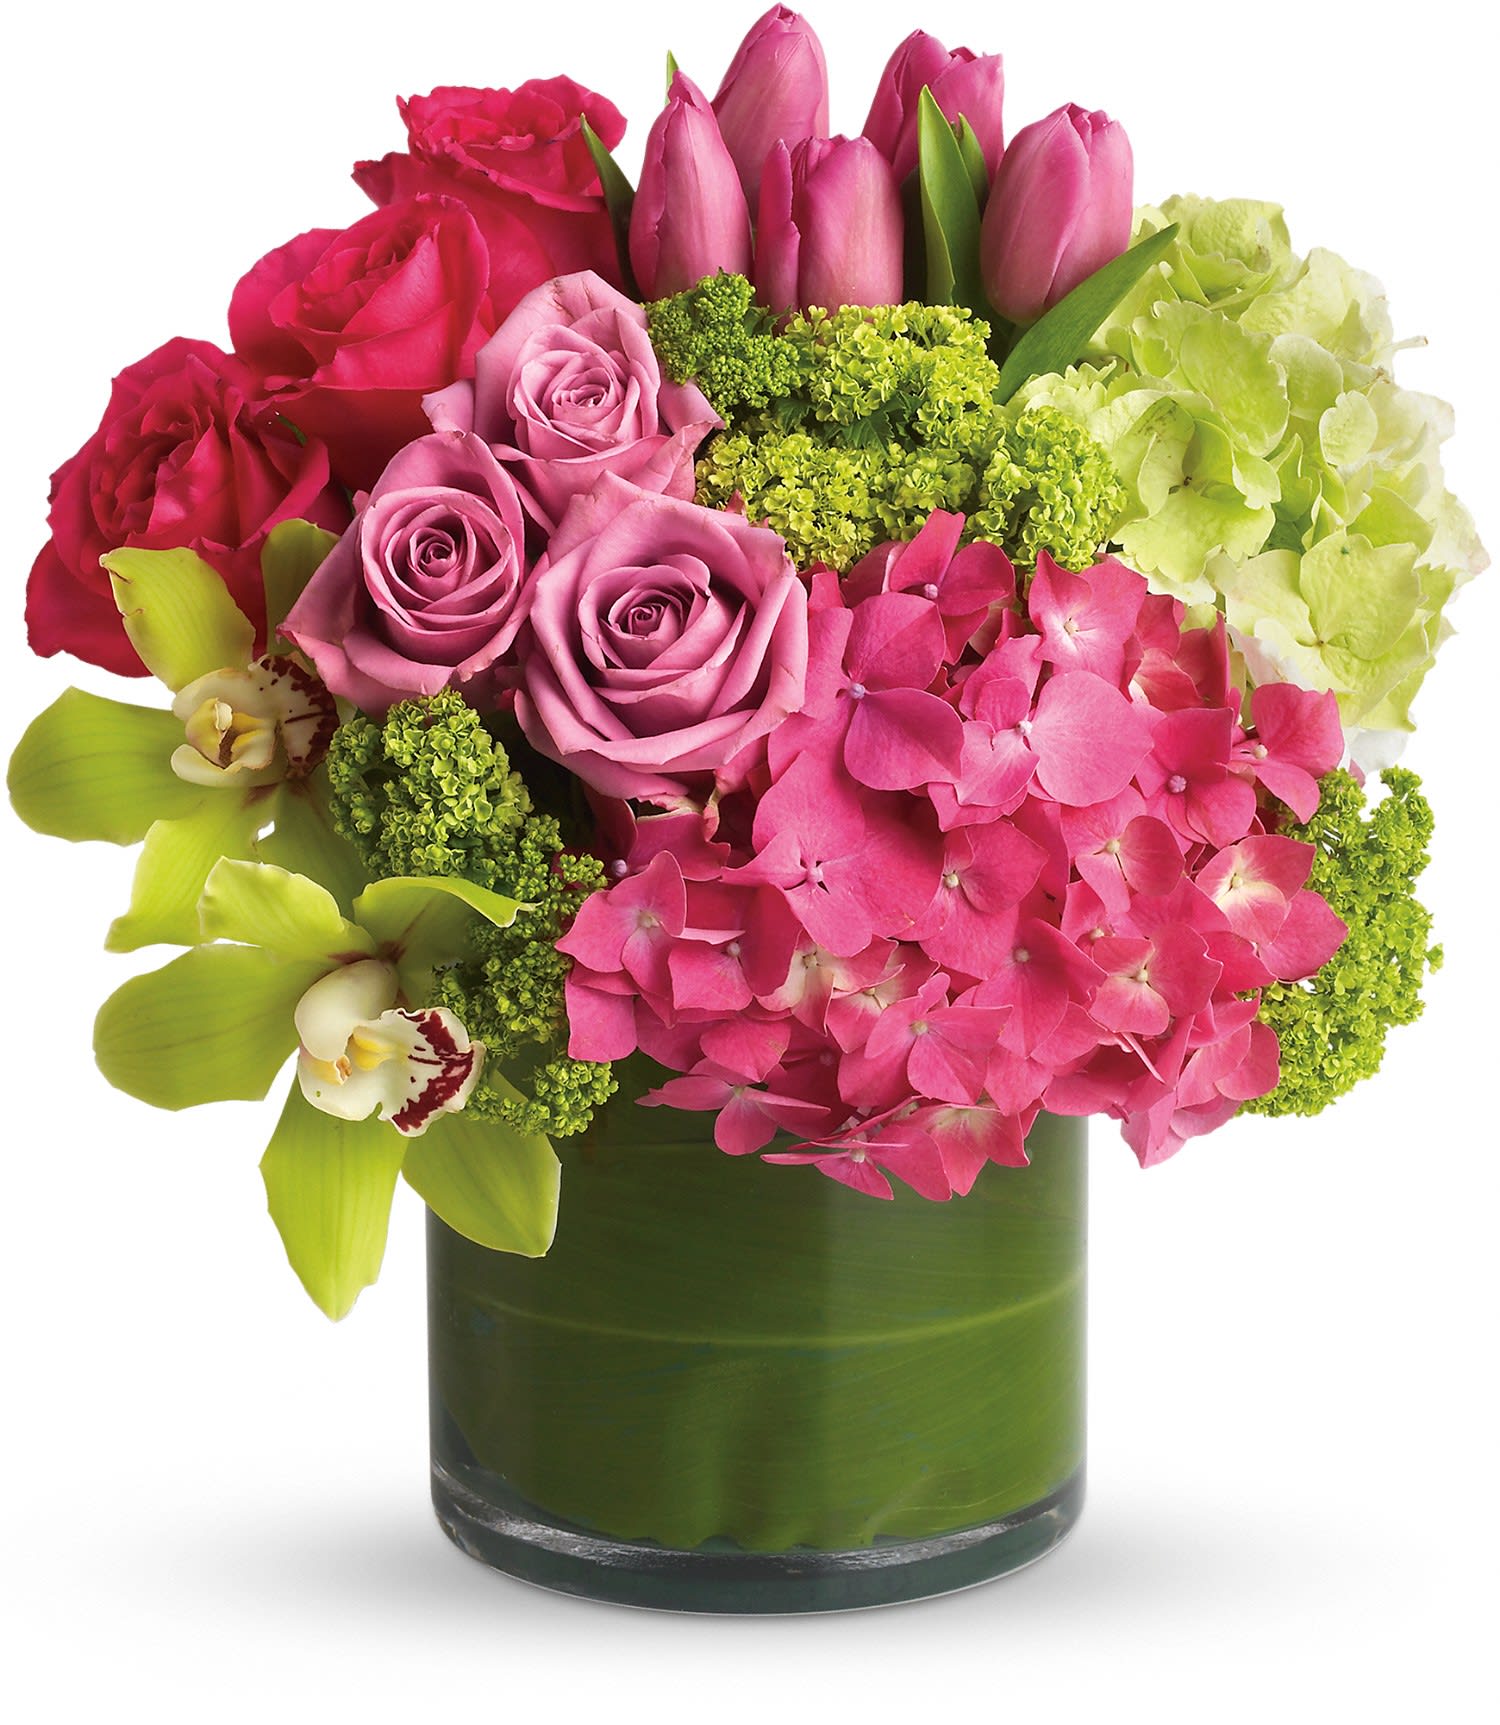 New Sensations - Upscale and uptown. This fantastic arrangement is a beauty and a half to behold. Overflowing with gorgeous blossoms and delivered in a leaf-lined cylinder vase, it's truly a floral fantasy.